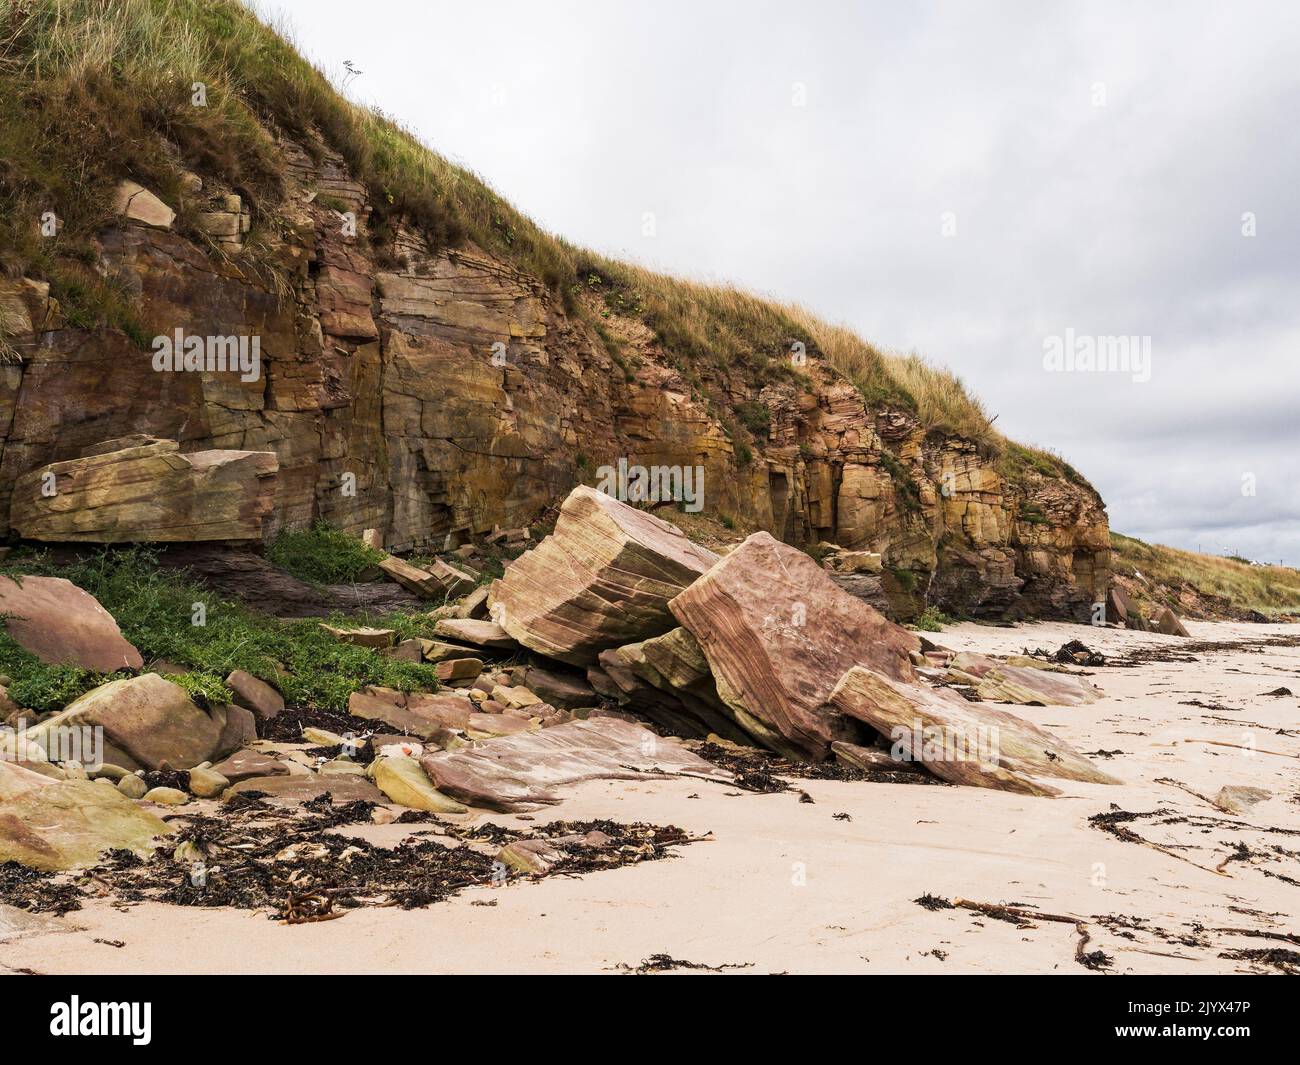 Coastal erosion illustrated by fallen sandstone cliffs at Cresswell beach in Northumberland, UK Stock Photo